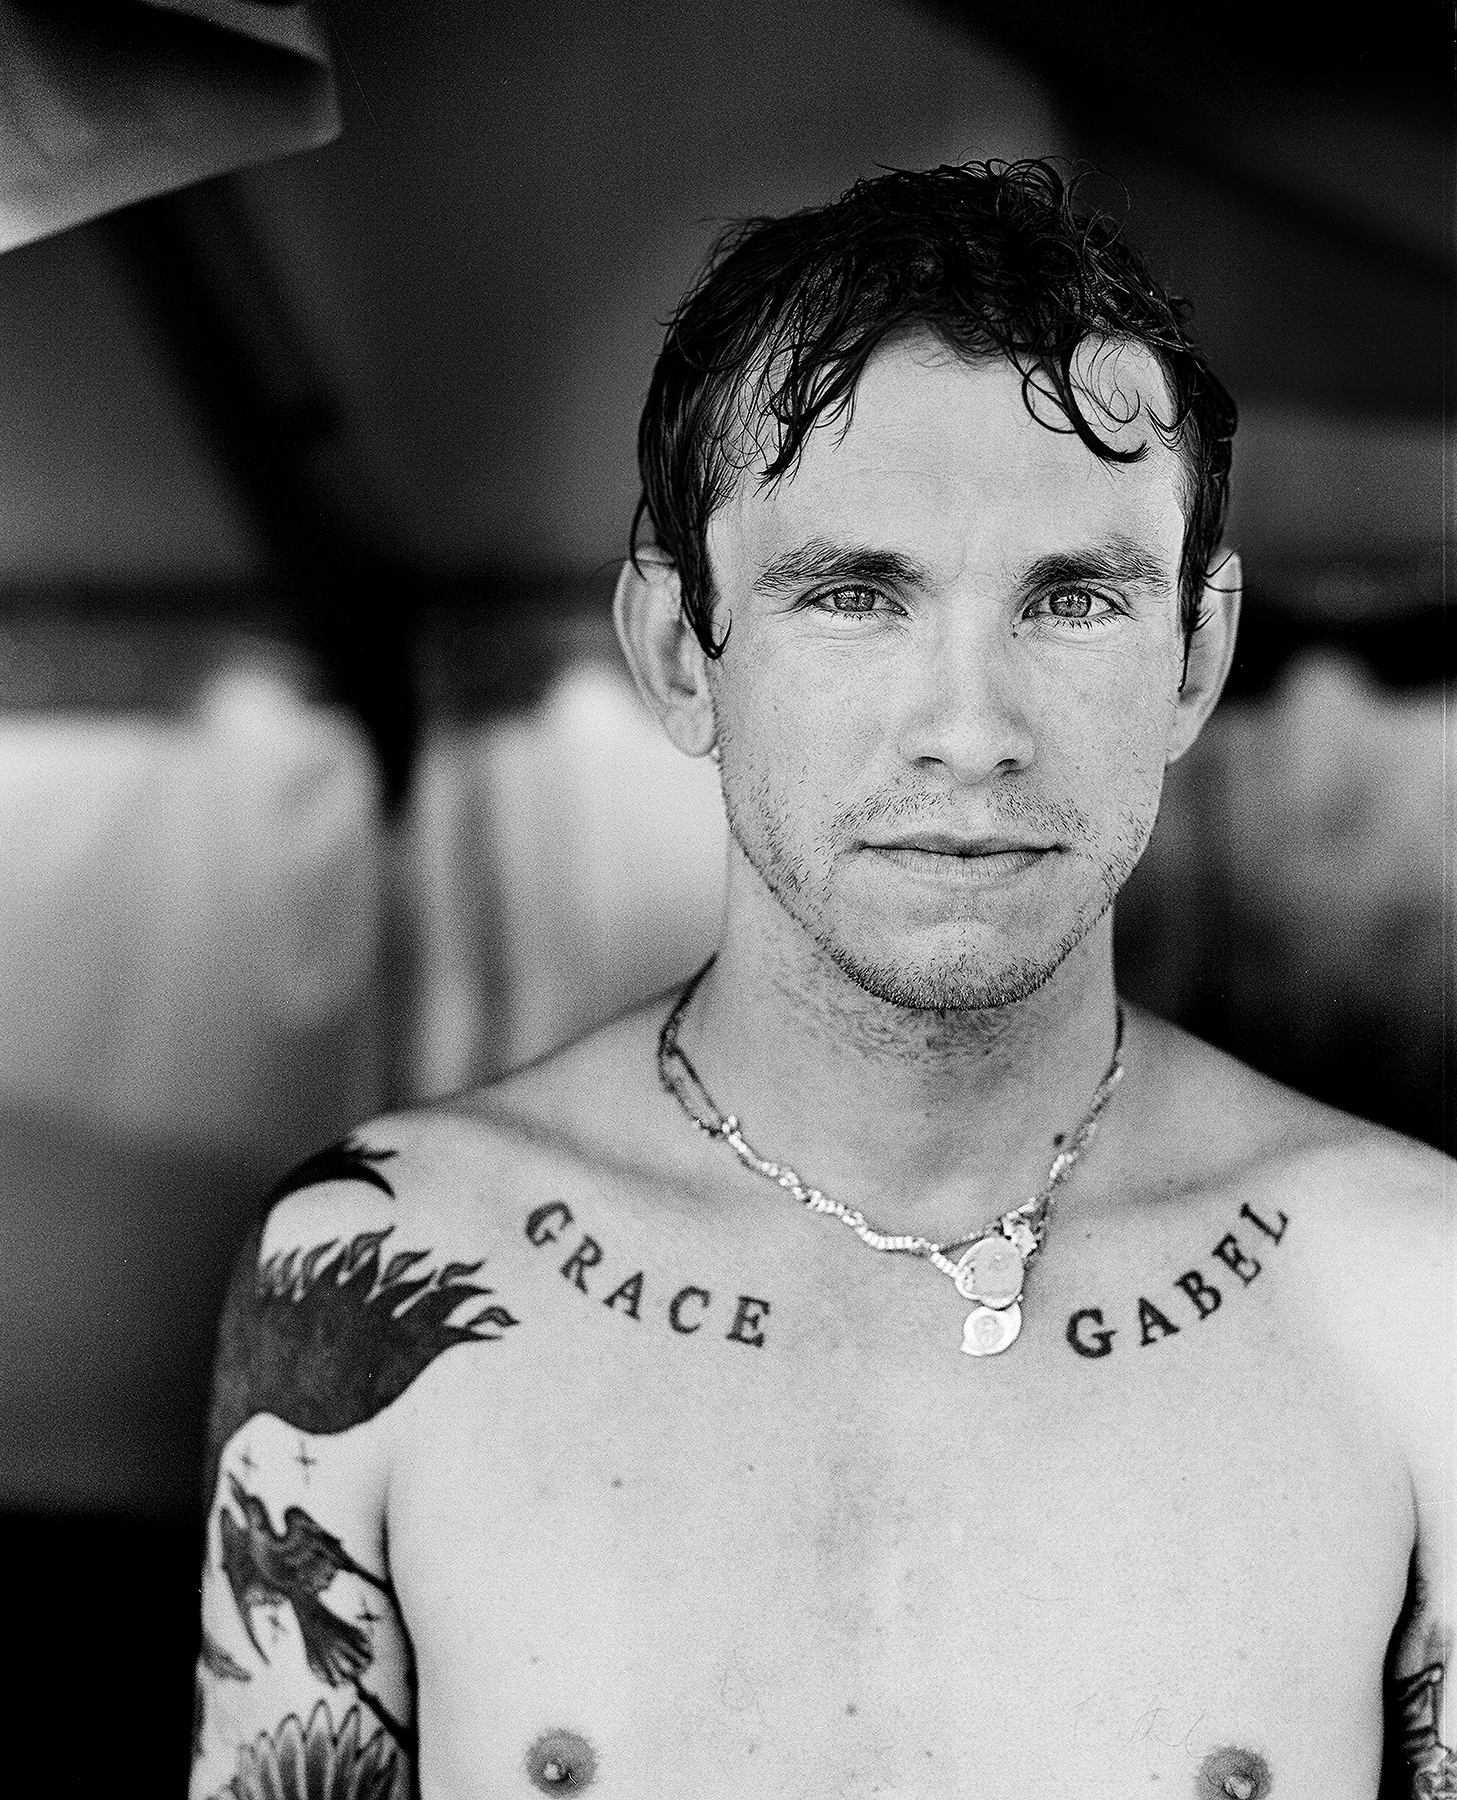 Laura Jane/Tom Gable at Bonnaroo by Boston based commercial athlete and celebrity portrait photographer Brian Nevins